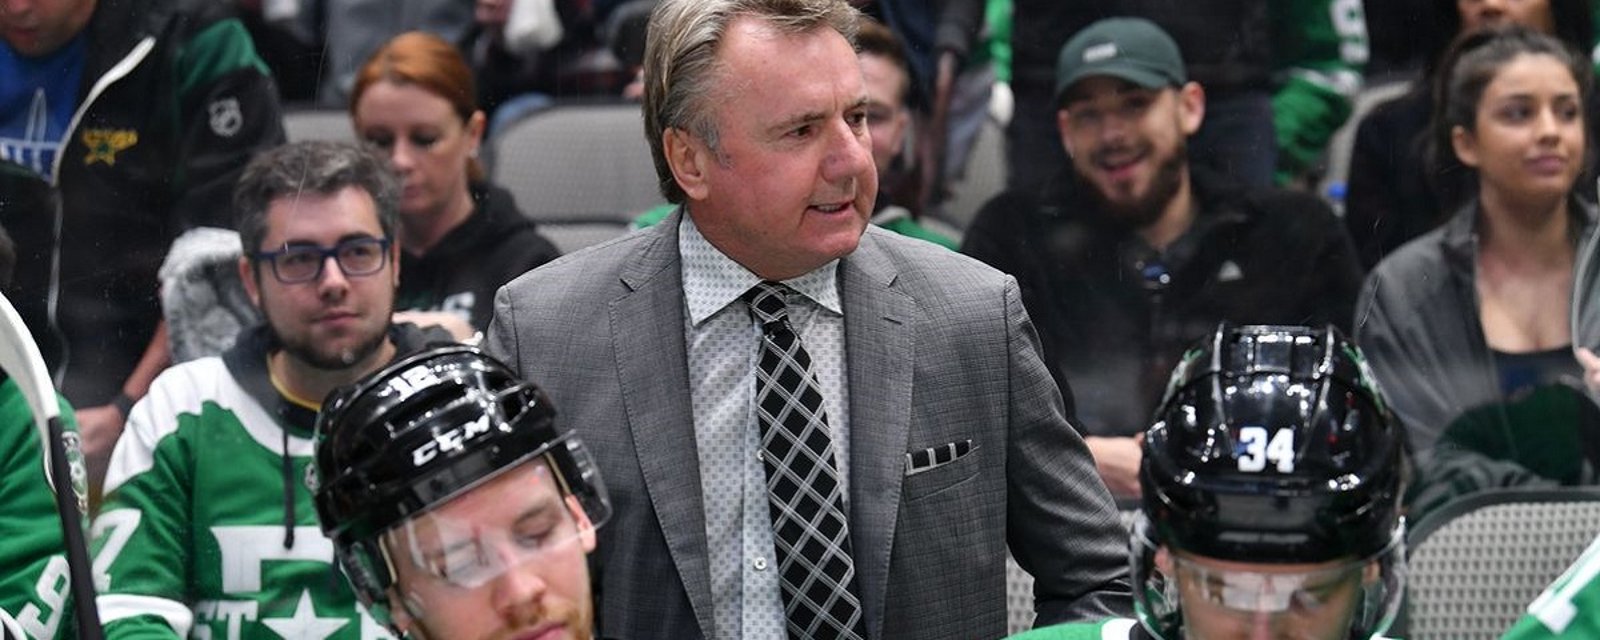 Stars head coach Rick Bowness pulled from the game due to COVID.